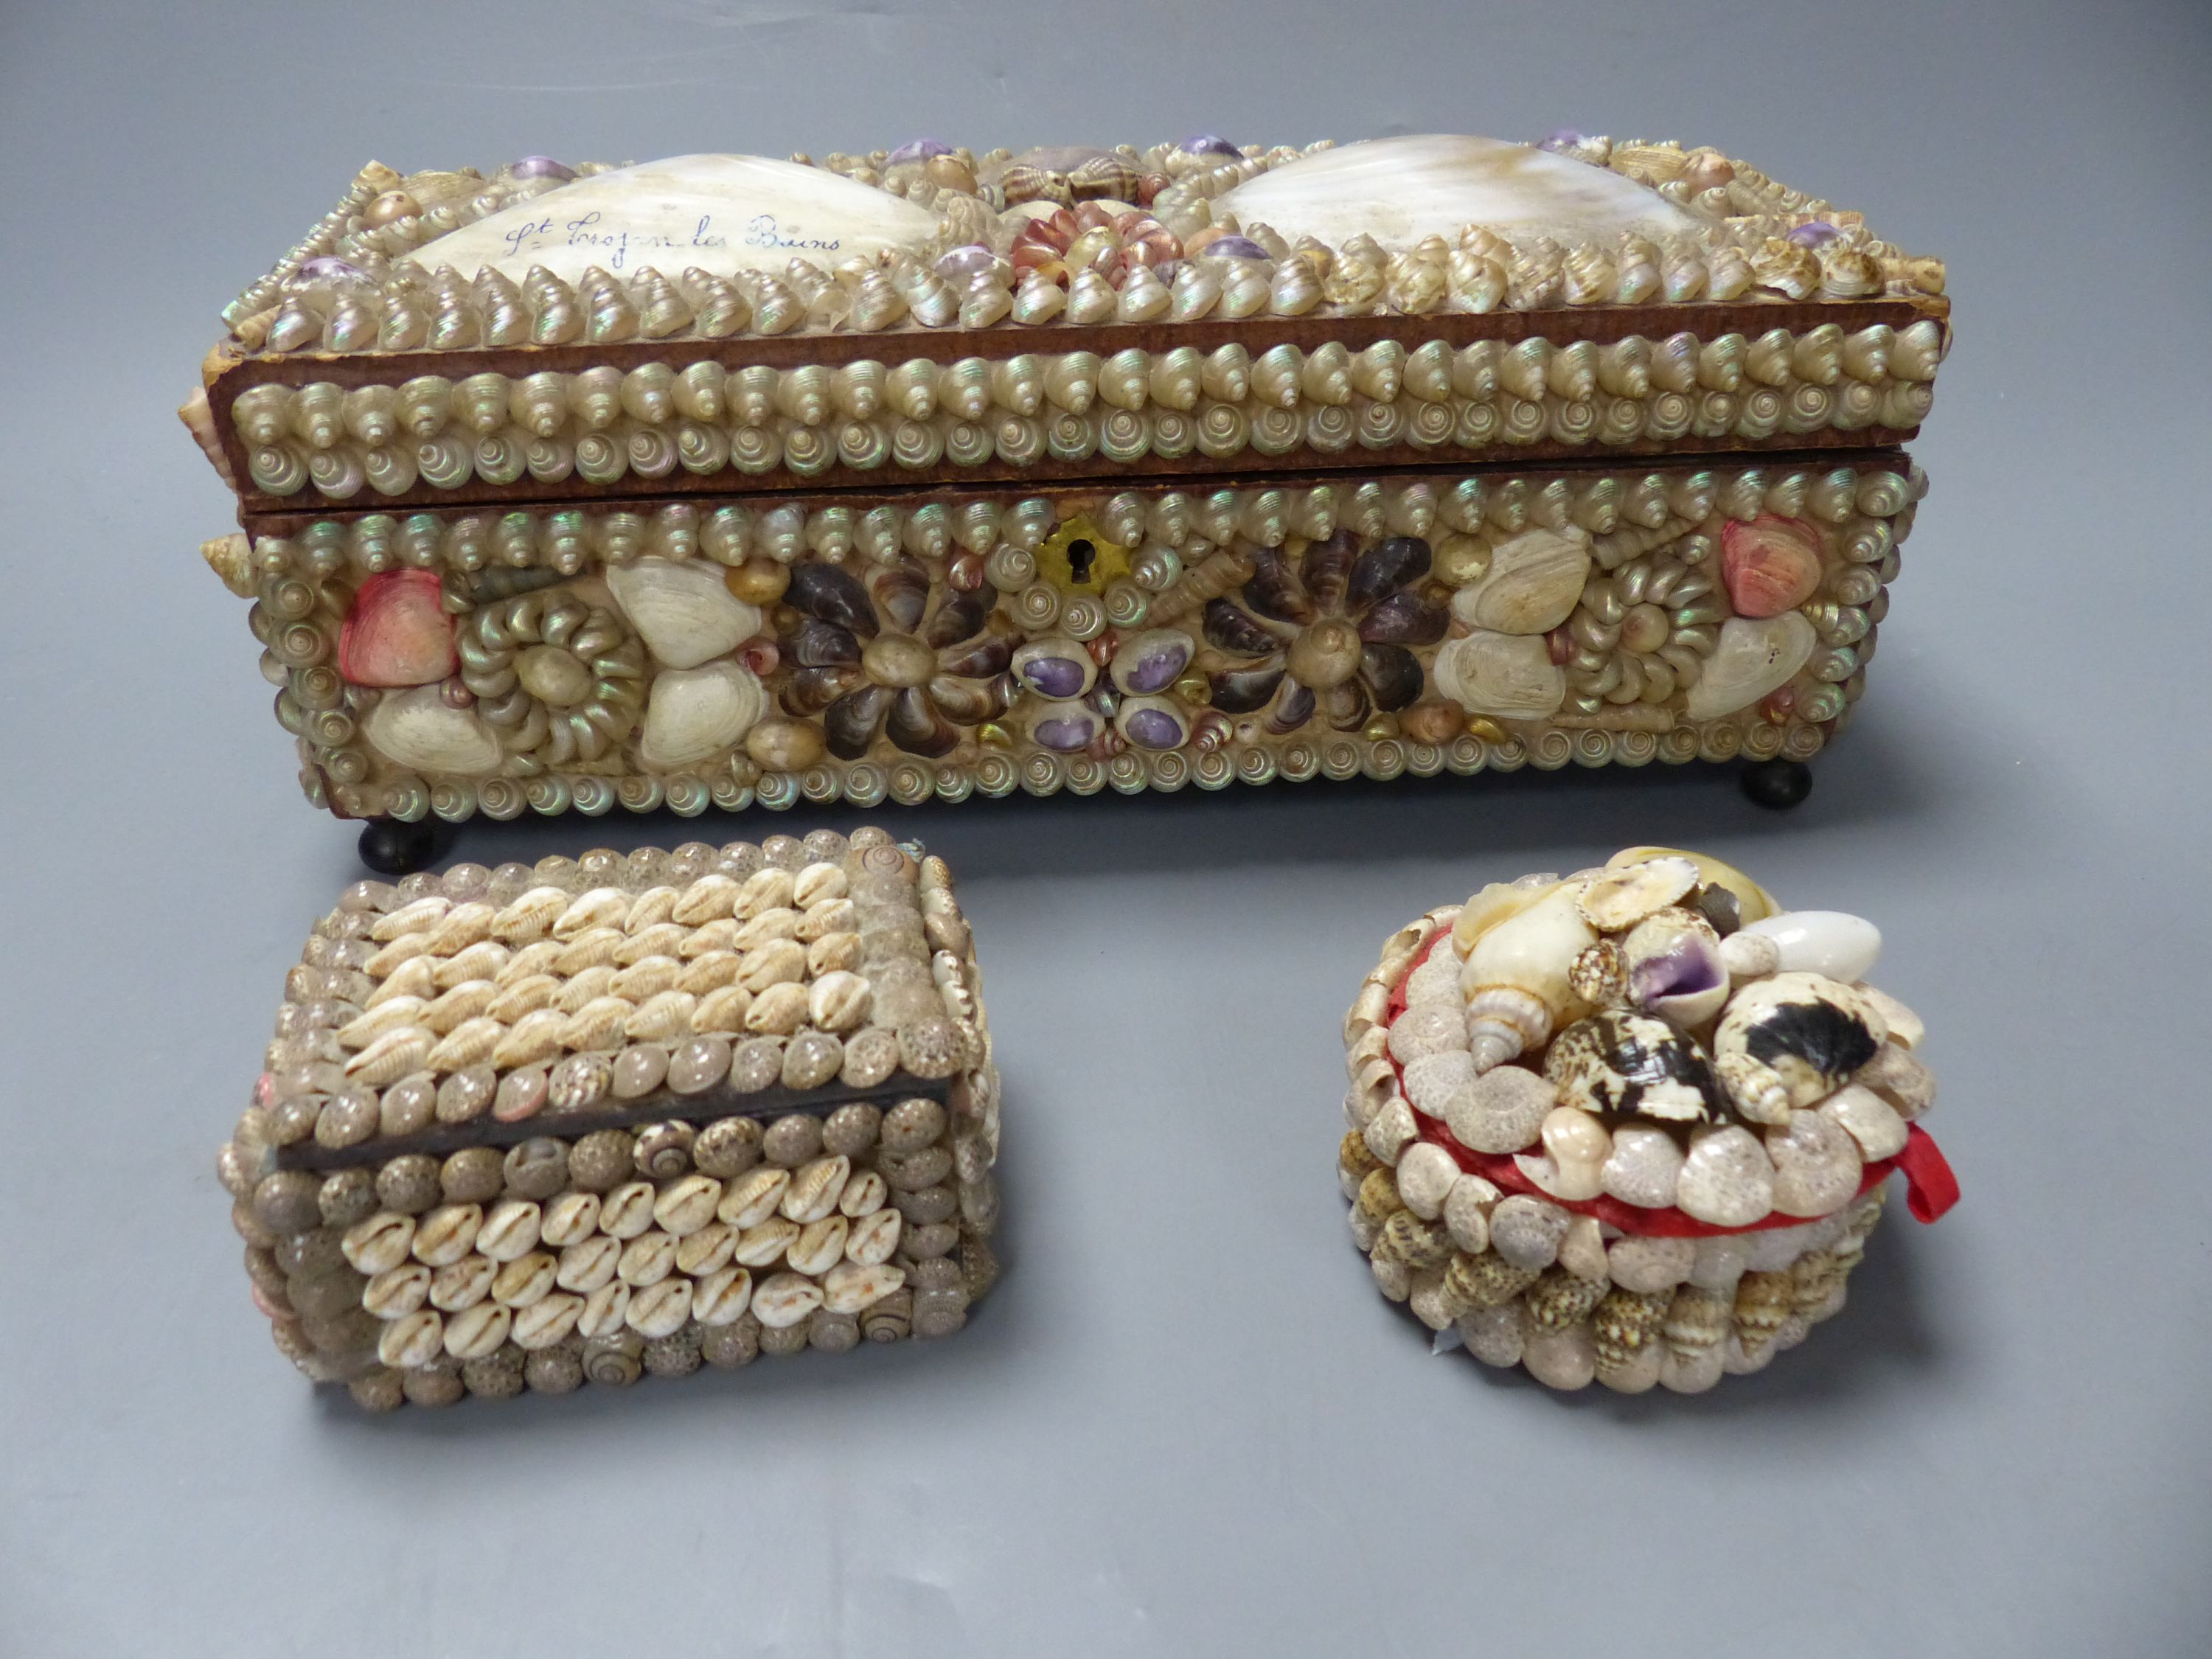 A French sailors seashell encrusted box with mirrored lid interior and two others, longest 29cm